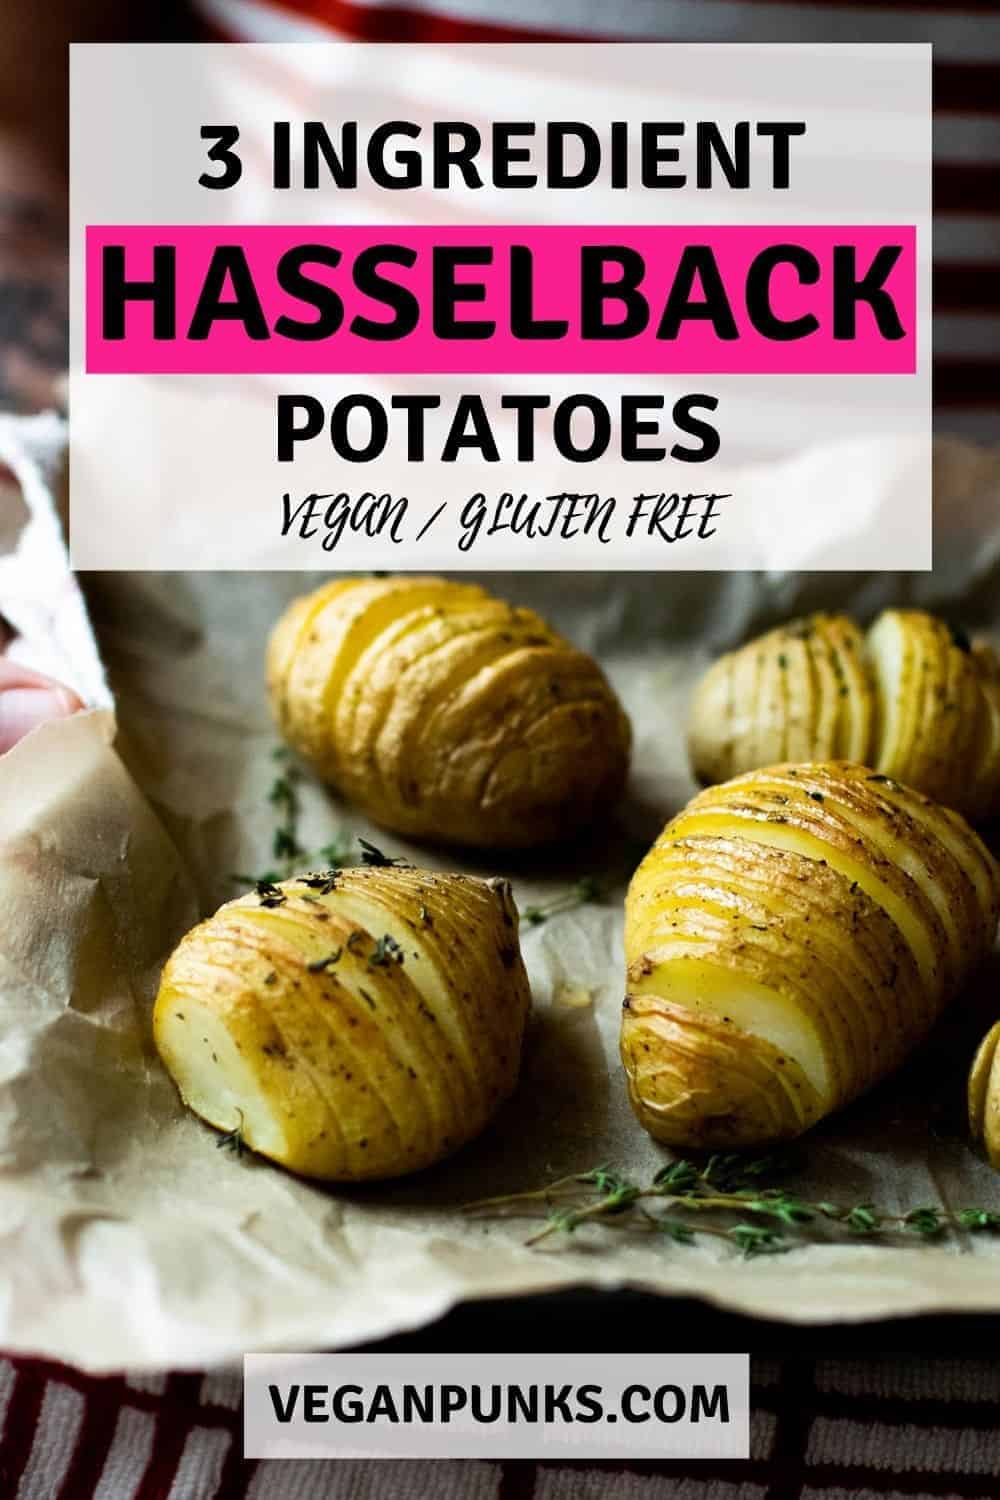 A Pinterest image of hasselback potatoes with a title at the top and our website url below